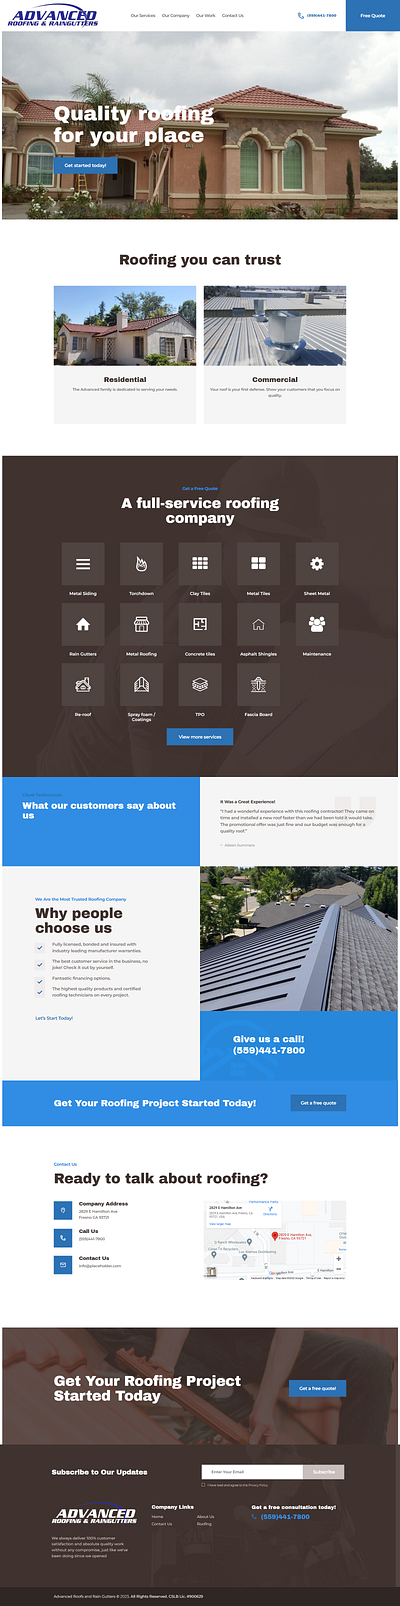 Advanced roofing and raingutters: Roof contractor design graphic design ui web design